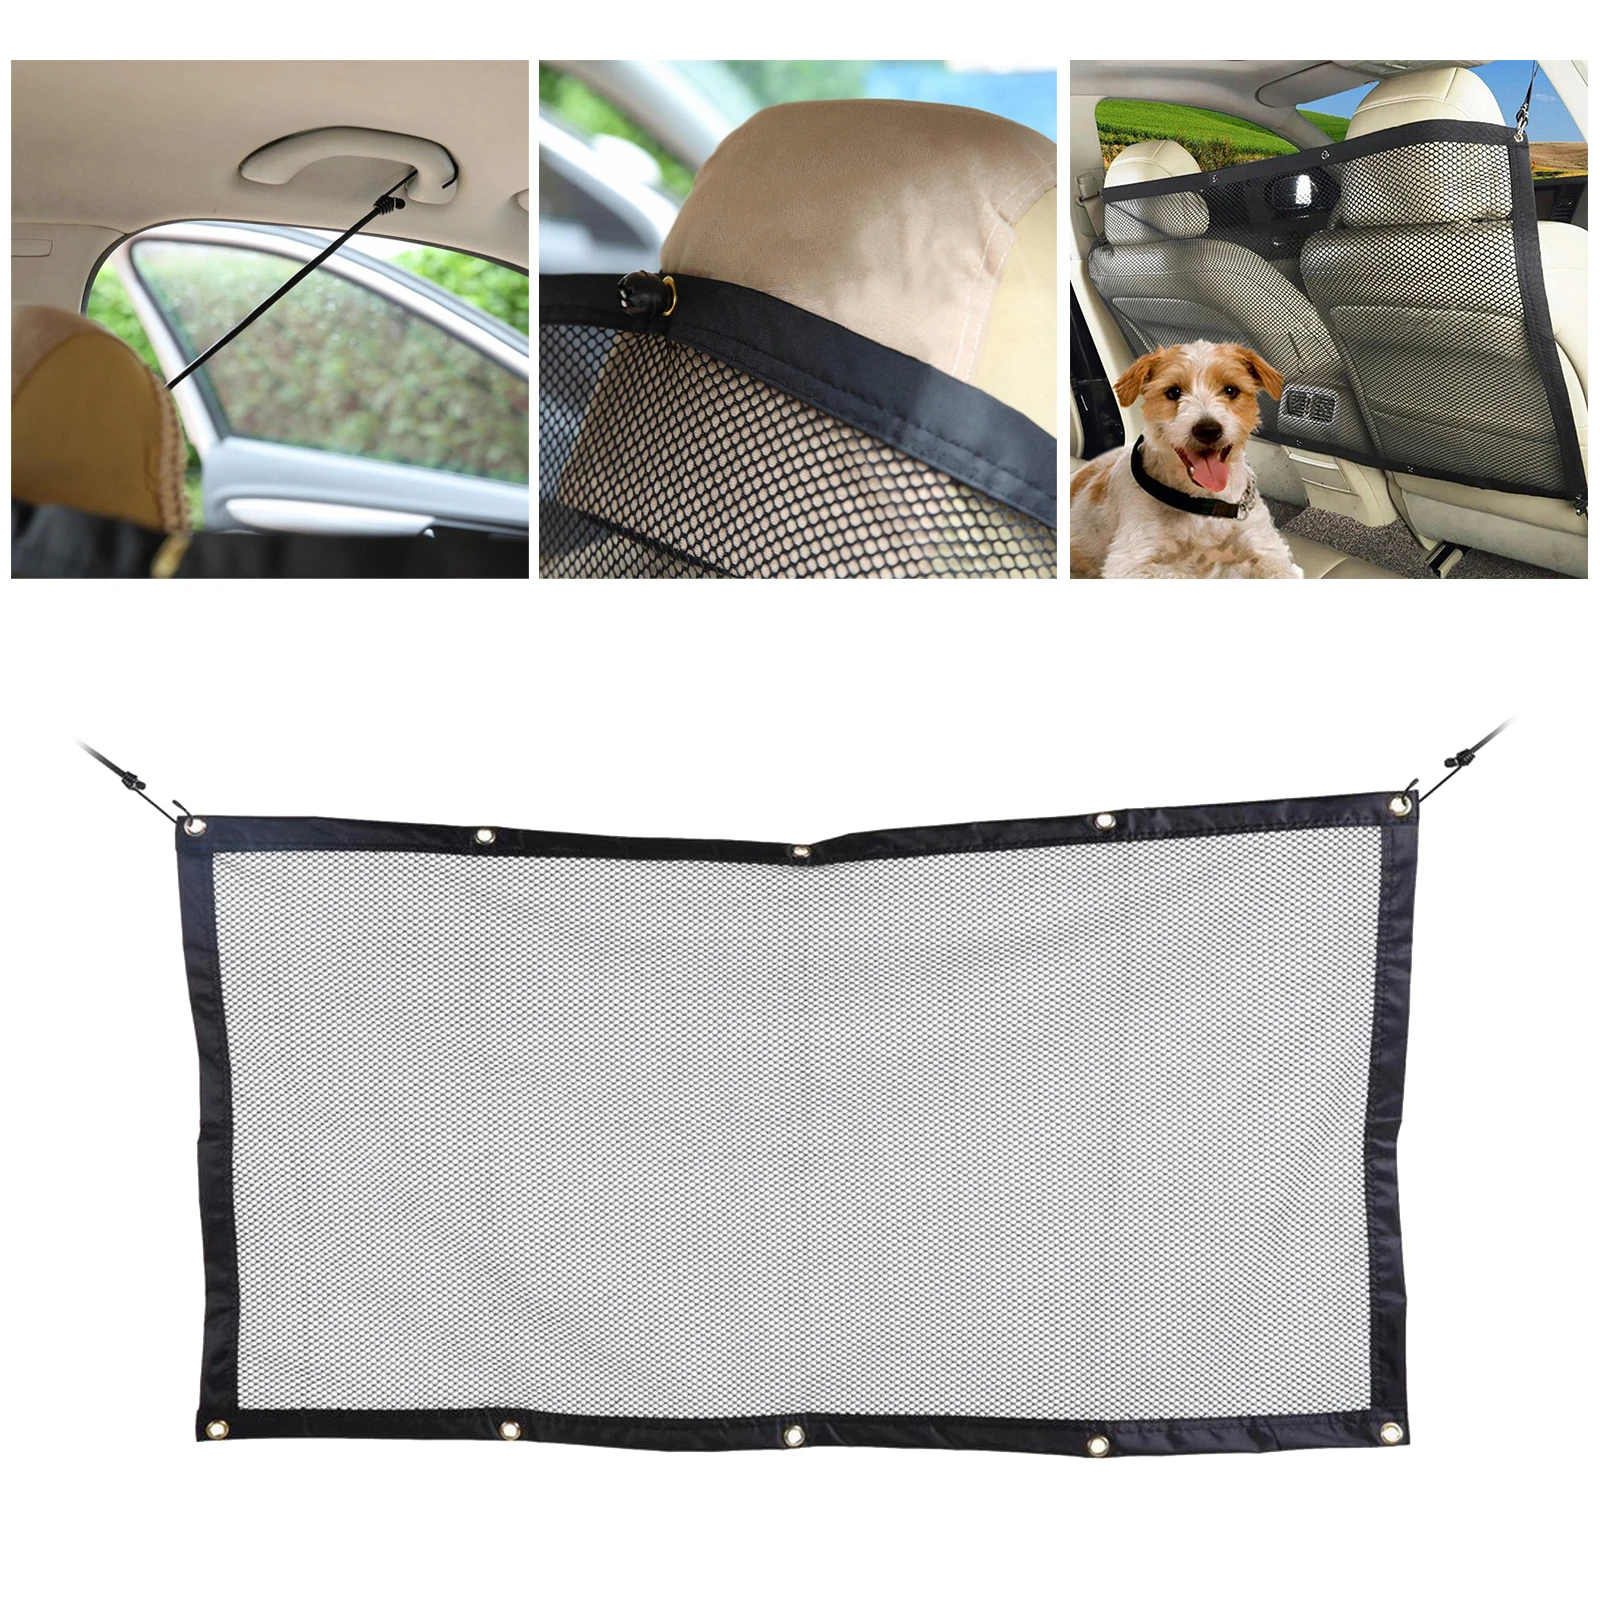 Auto Safety Car Dog Barrier Vehicle Backseat Baby Safety Divider for Pets